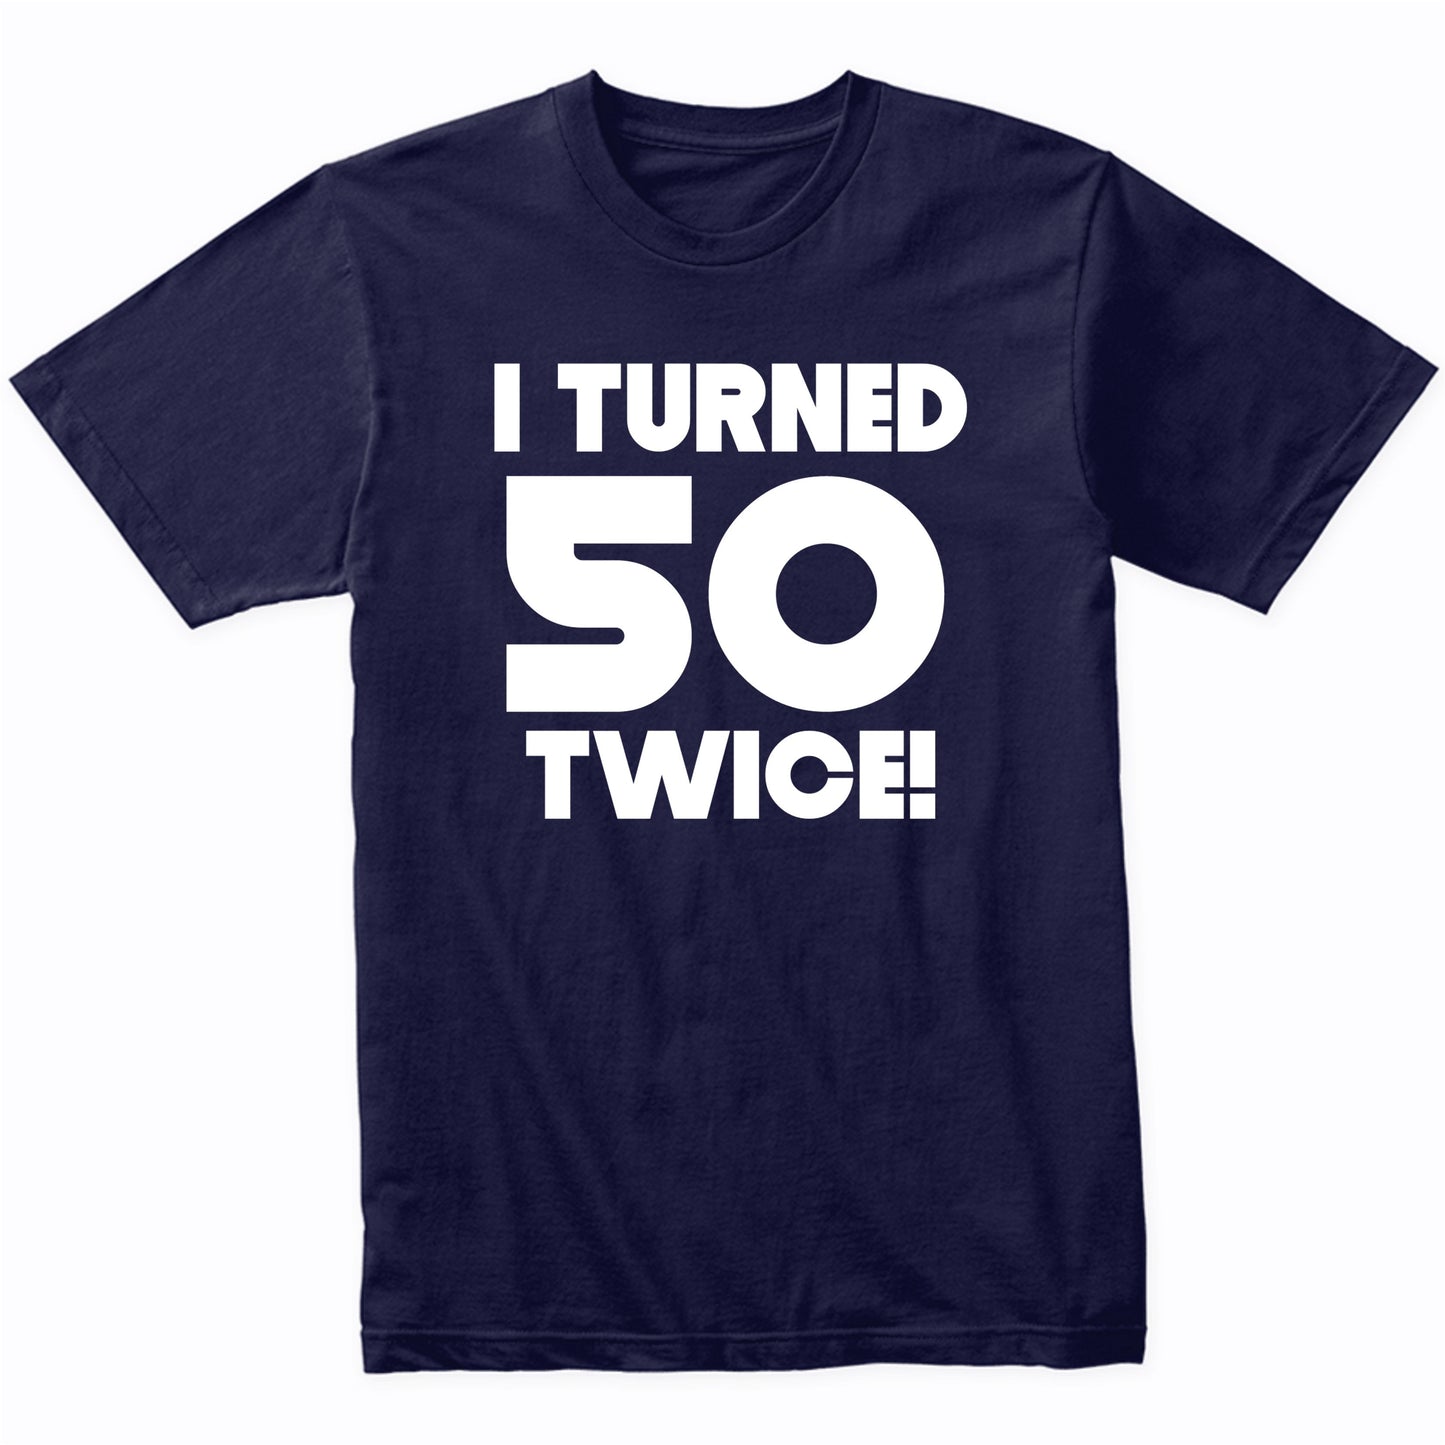 I Turned 50 Twice 100 Years Old Funny 100th Birthday T-Shirt